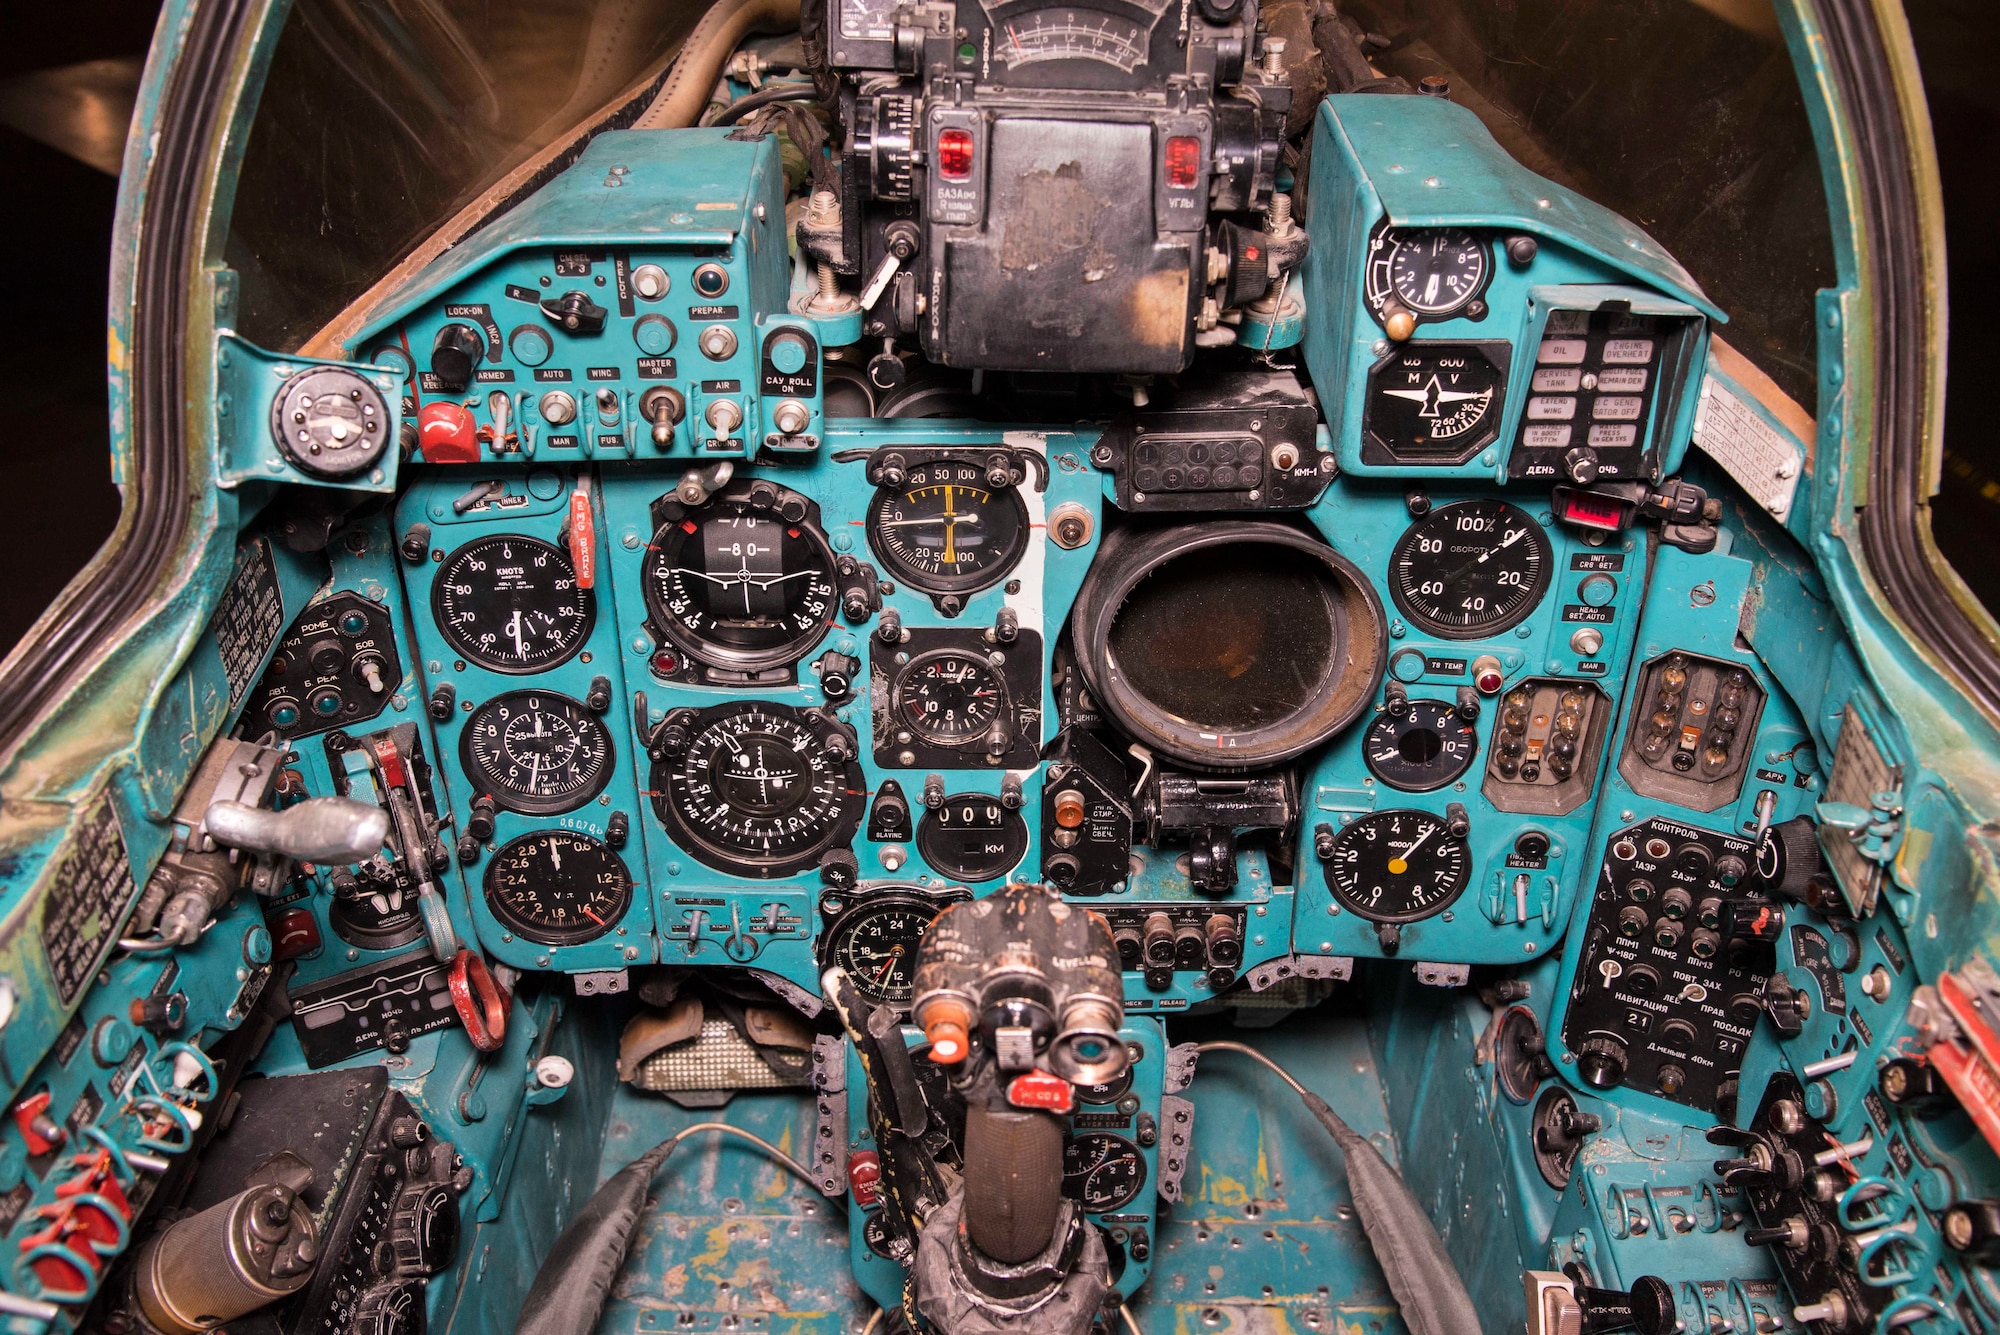 DAYTON, Ohio -- The Mikoyan-Gurevich MiG-23MS “Flogger-E” cockpit view in the museum's Cold War Gallery. (U.S. Air Force photo by Ken LaRock) 